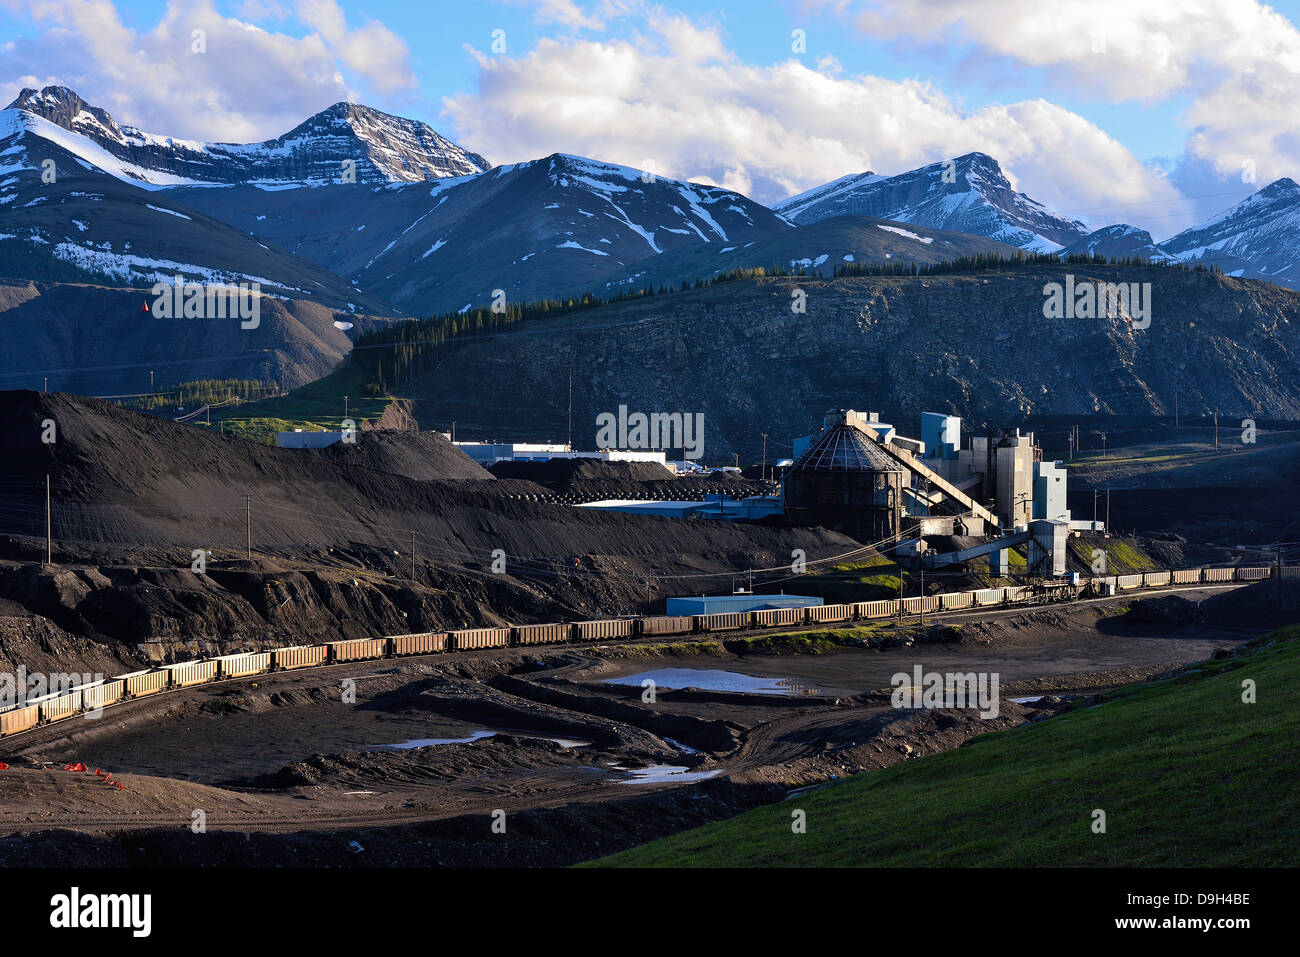 A coal processing plant nestled in the rocky mountains of Alberta Canada near the town of Hinton. Stock Photo